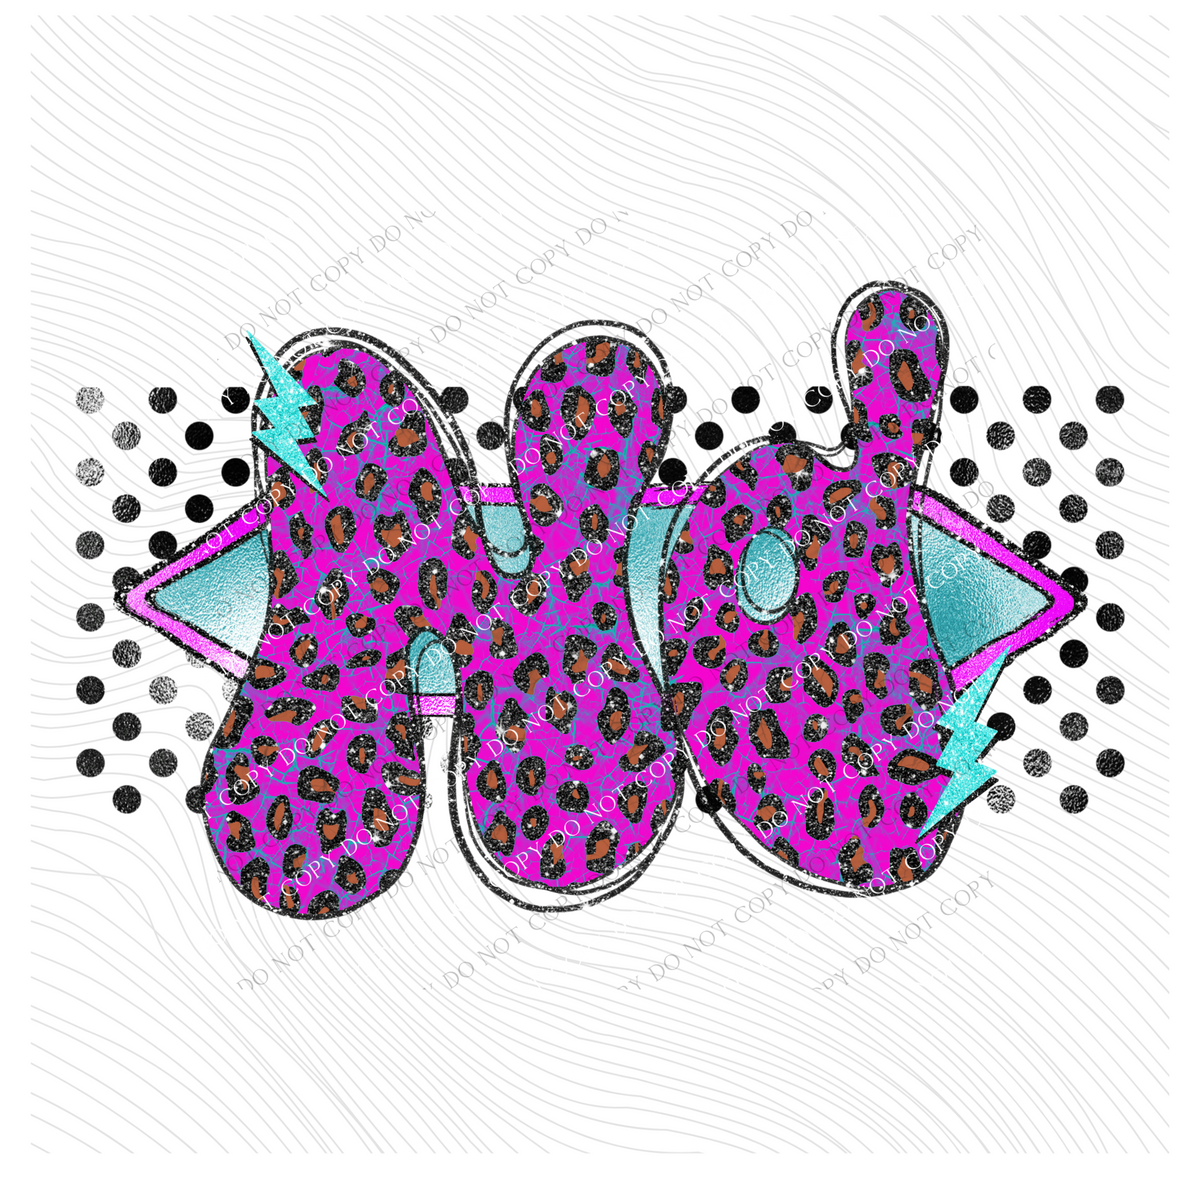 North Dakota Vintage Mermaid Cracked Marbled Leopard with Black Glitter and Foil in Bright Purple, Pinks & Turquoise Digital Design, PNG